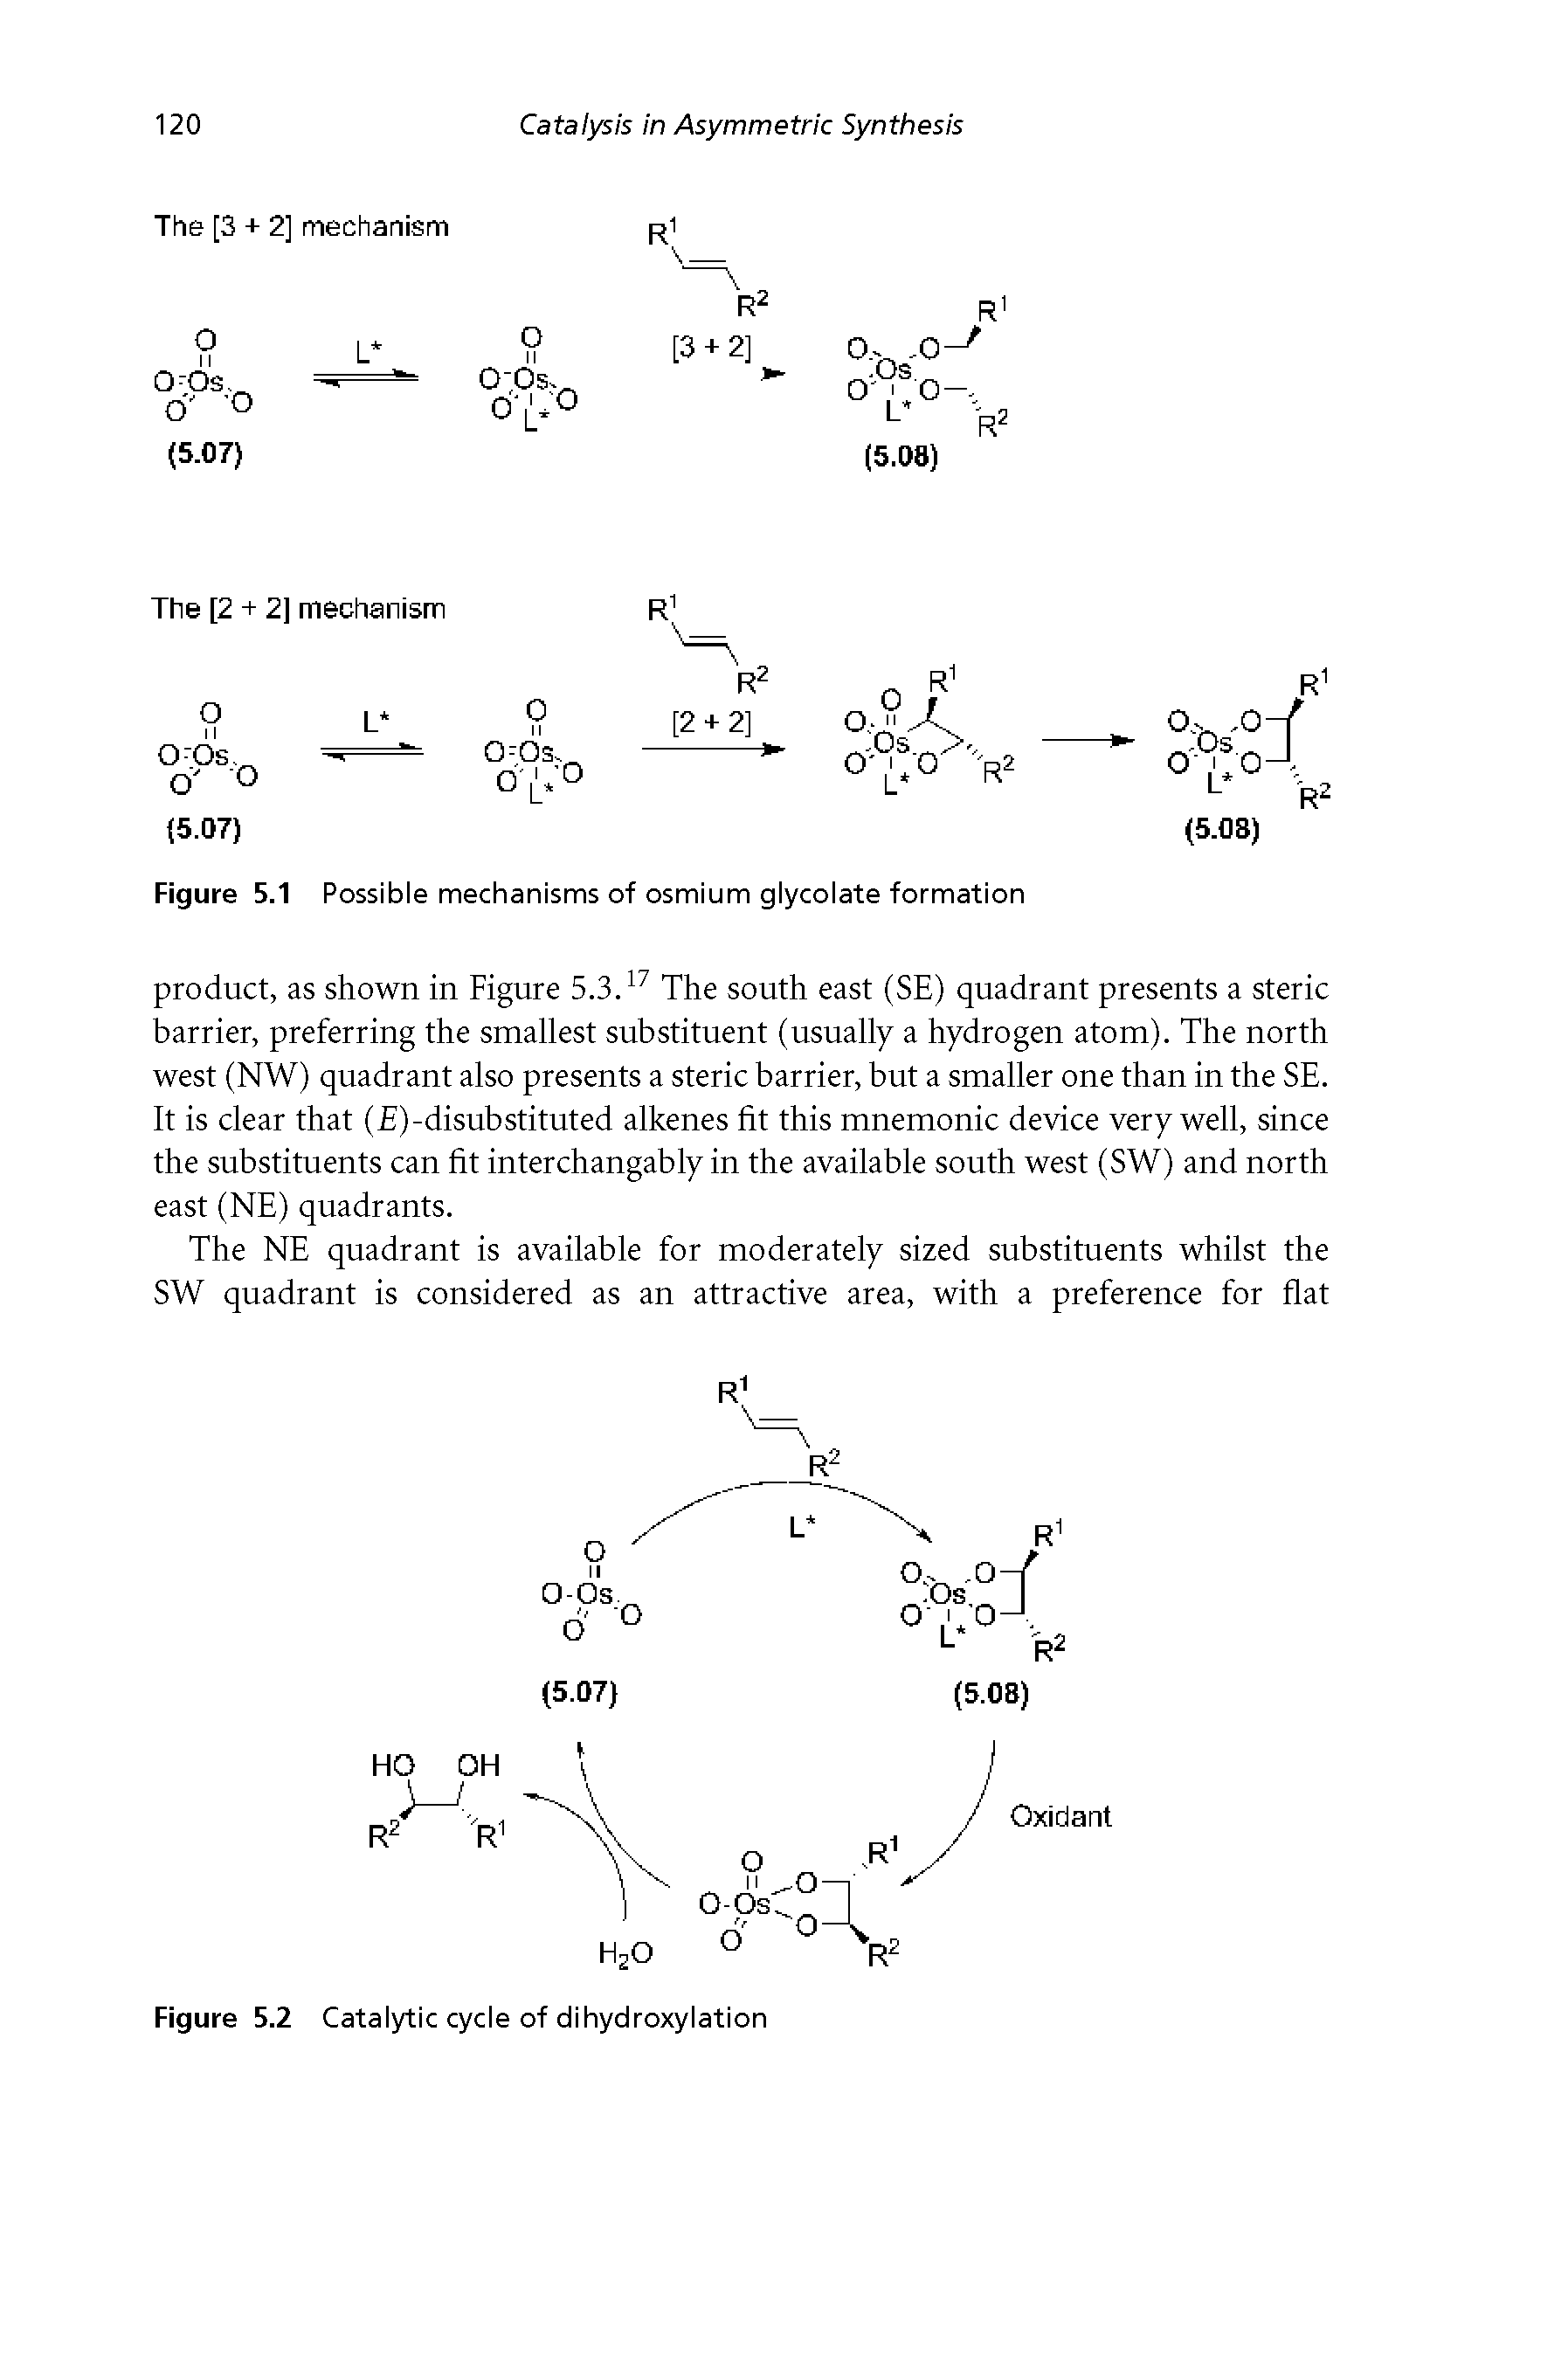 Figure 5.1 Possible mechanisms of osmium glycolate formation...